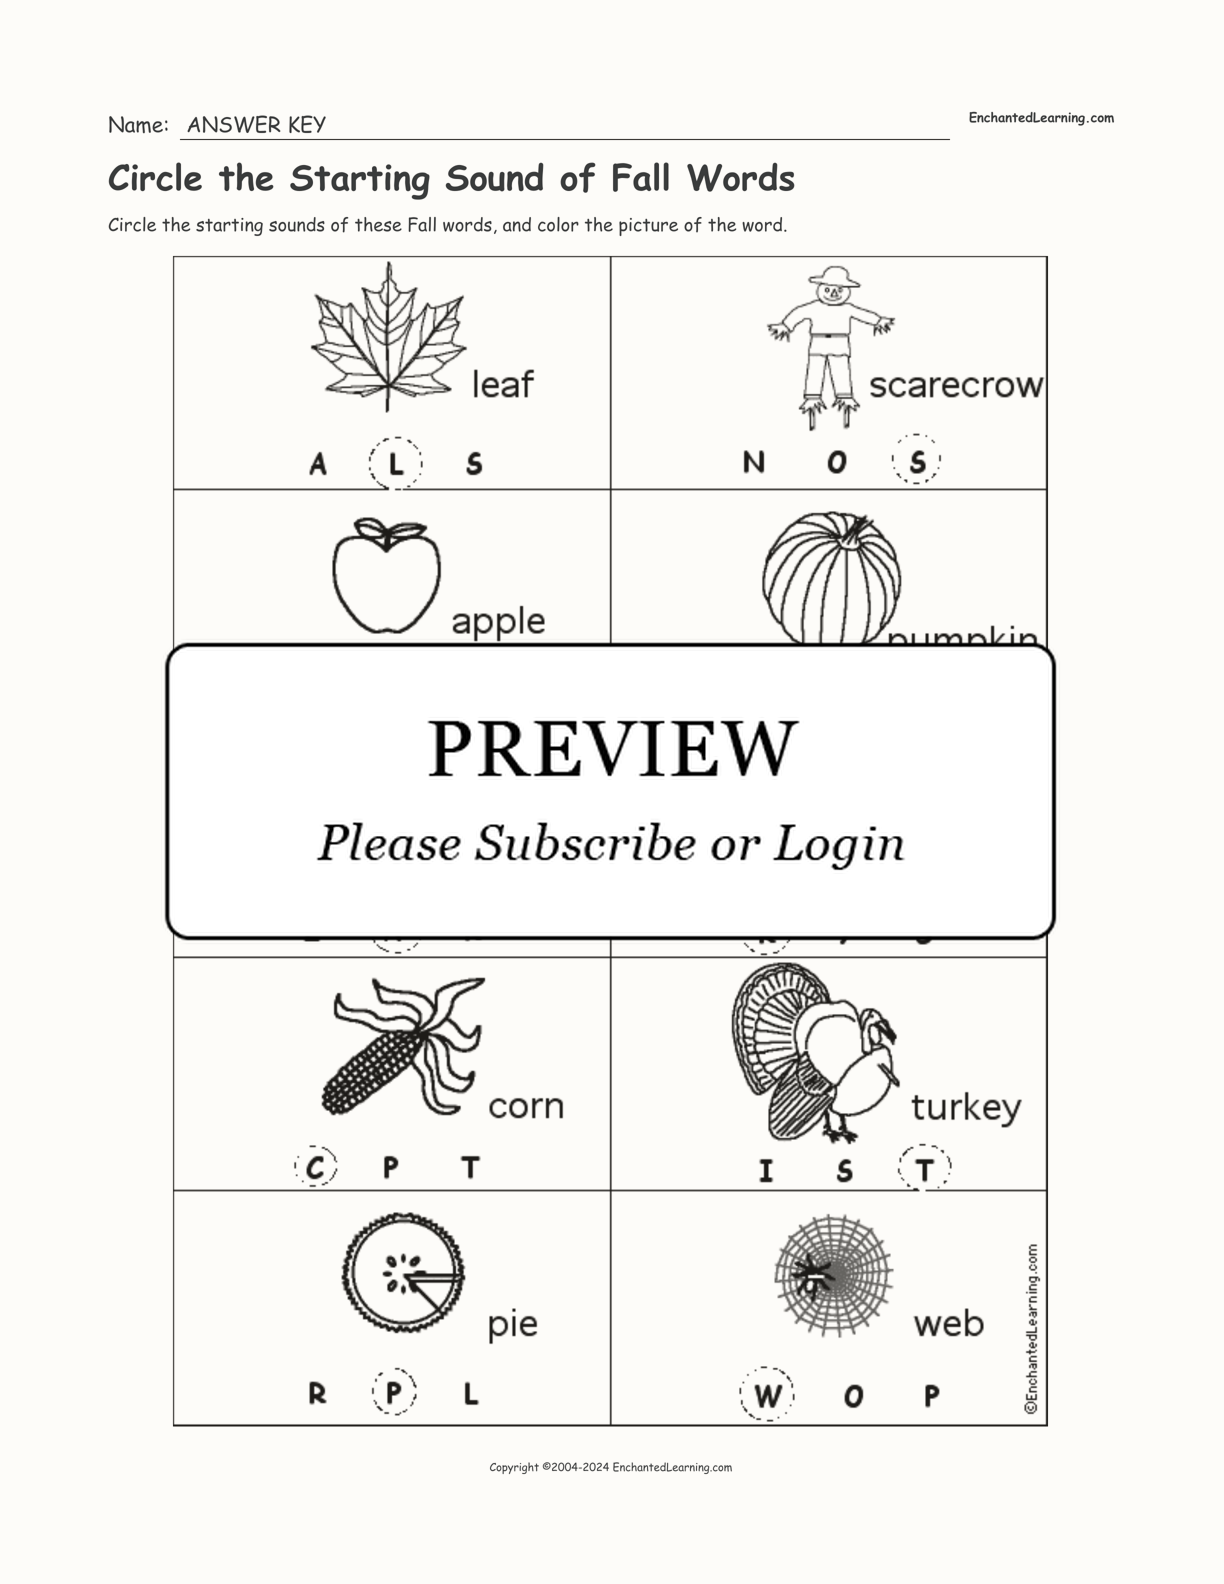 Circle the Starting Sound of Fall Words interactive worksheet page 2